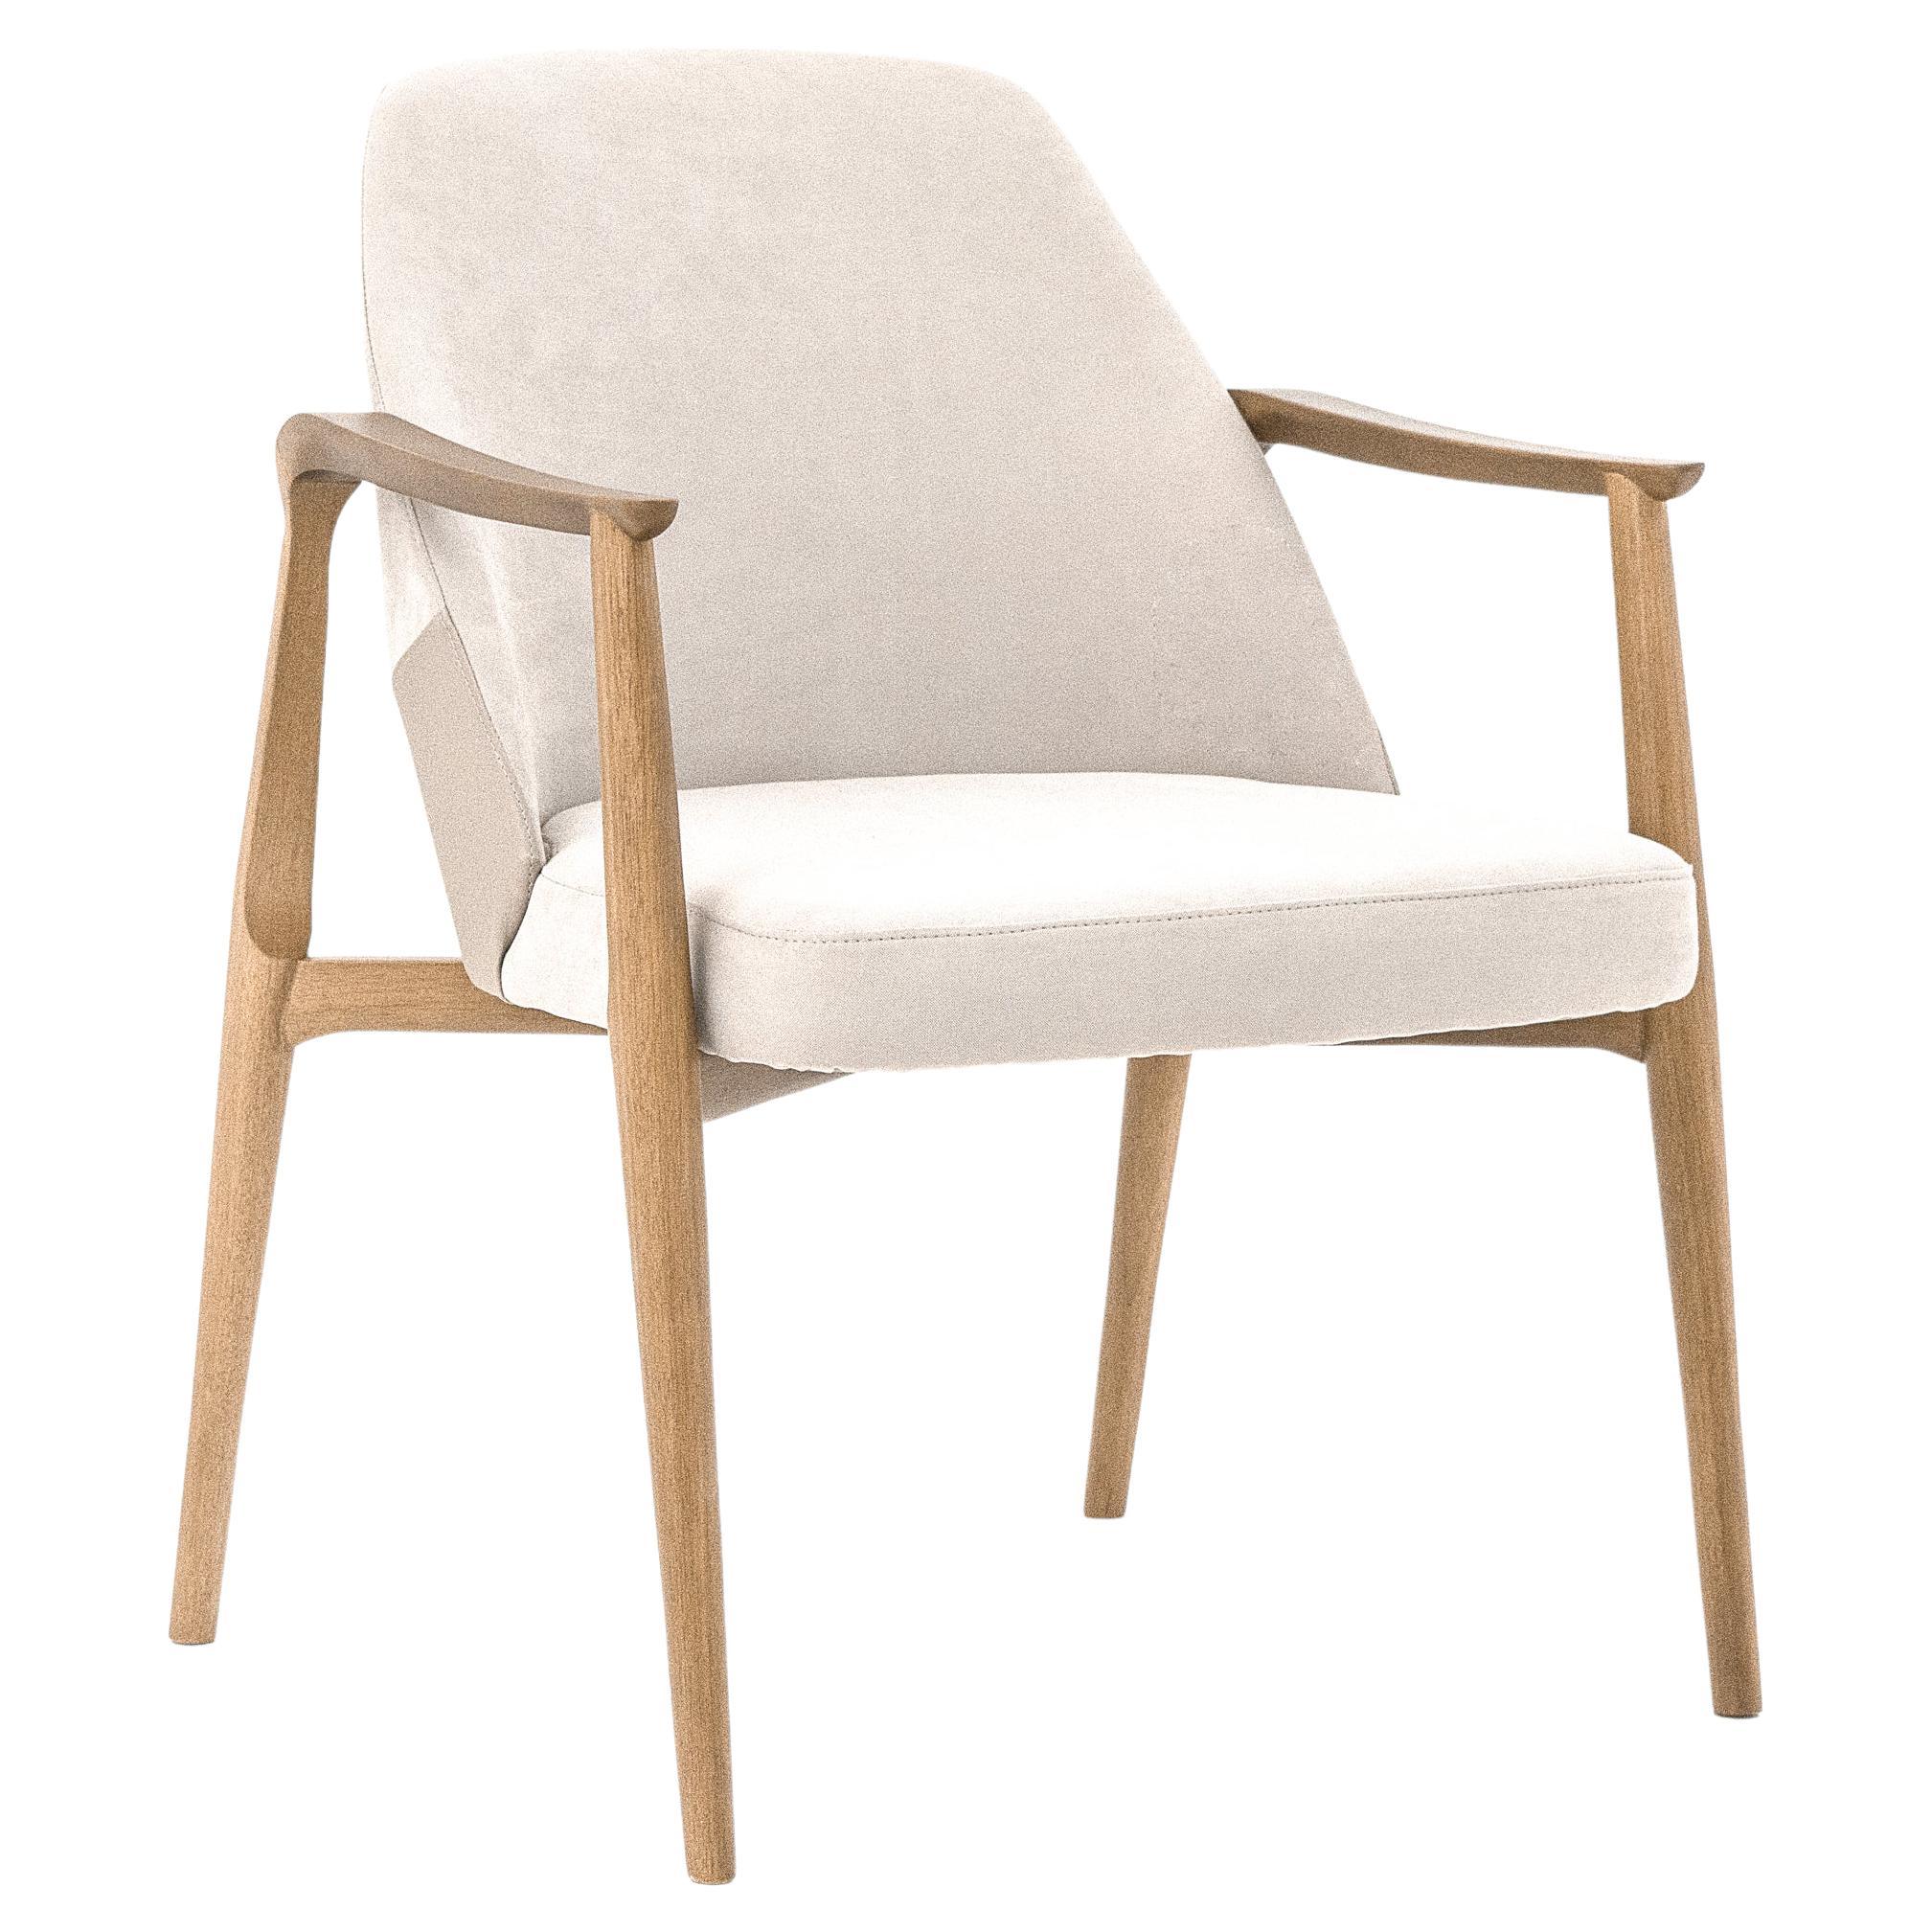 Wood Legs, Upholstered Fabric, Dandara Dining Chair with Armrest